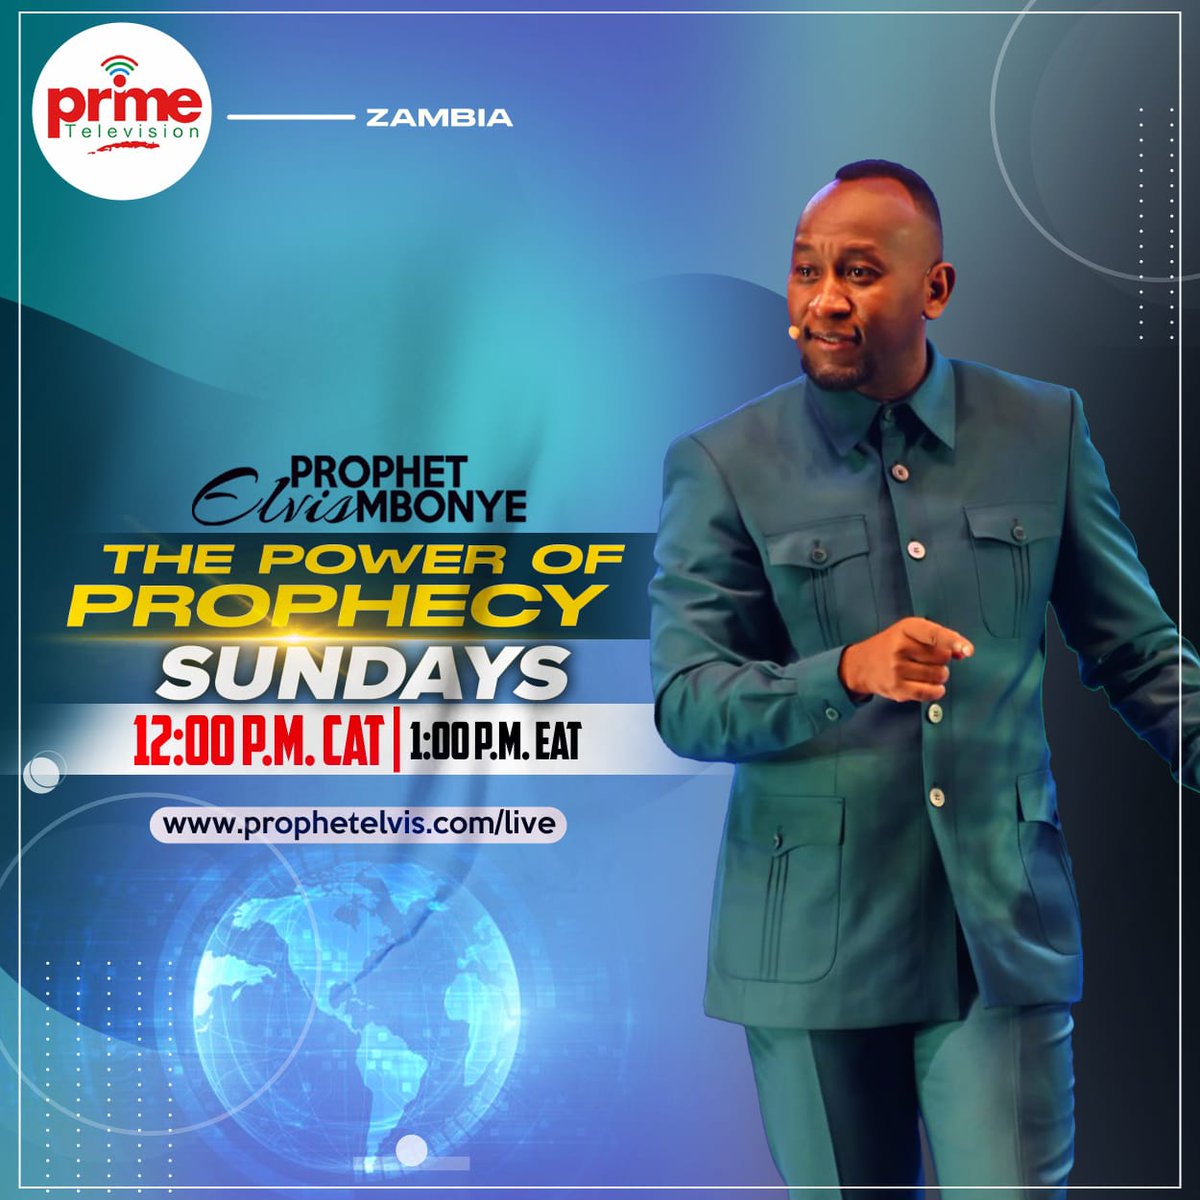 This Sunday November 05, 2023! Prophet Elvis Mbonye on PRIME TV Zambia 12:00 pm Central African Time (CAT)!! Live stream at prophetelvis.com/live #ProphetElvisMbonye